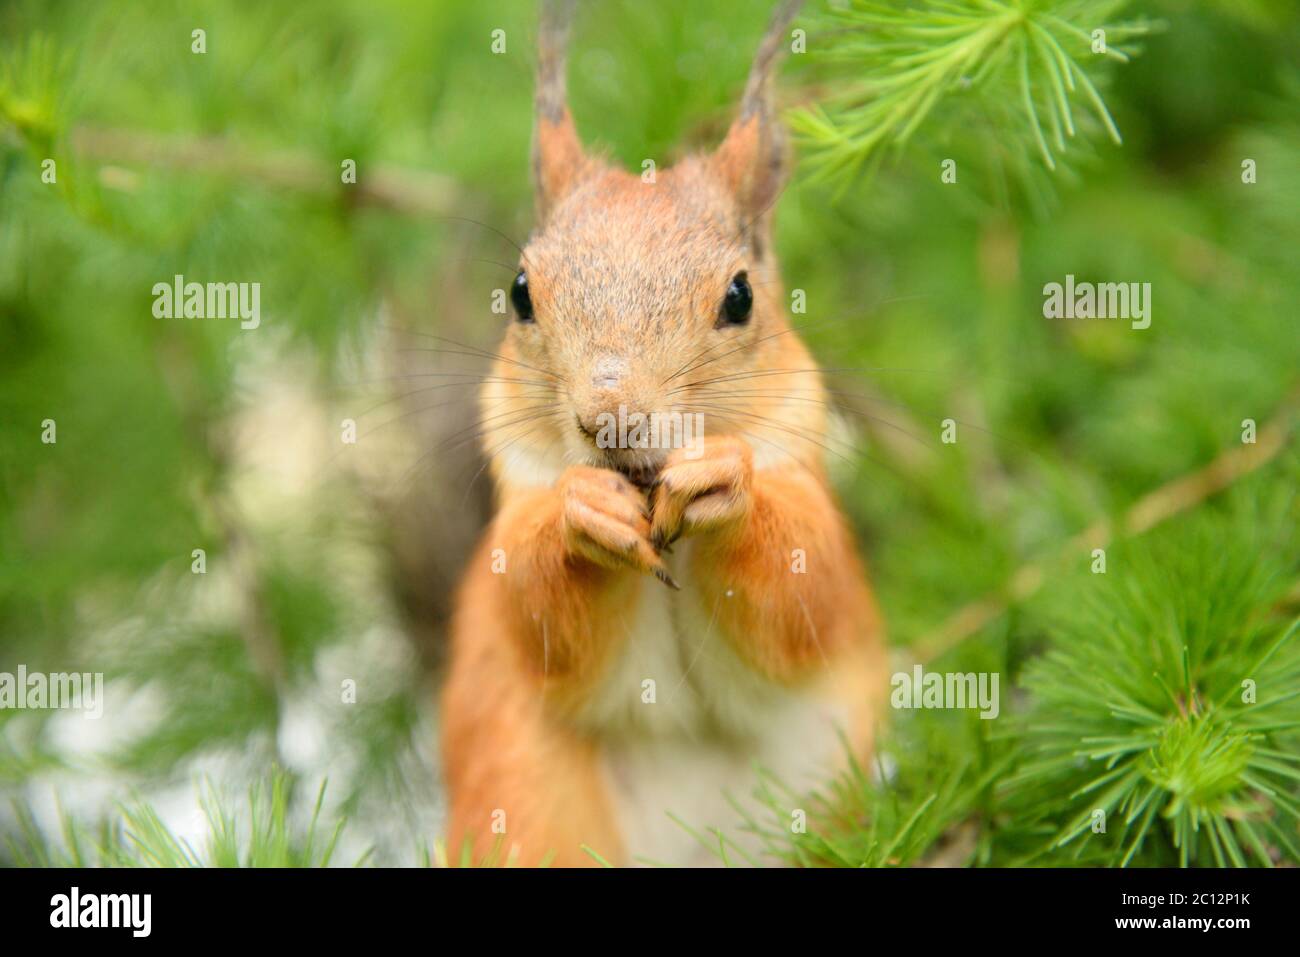 Squirrel in the natural environment. Stock Photo